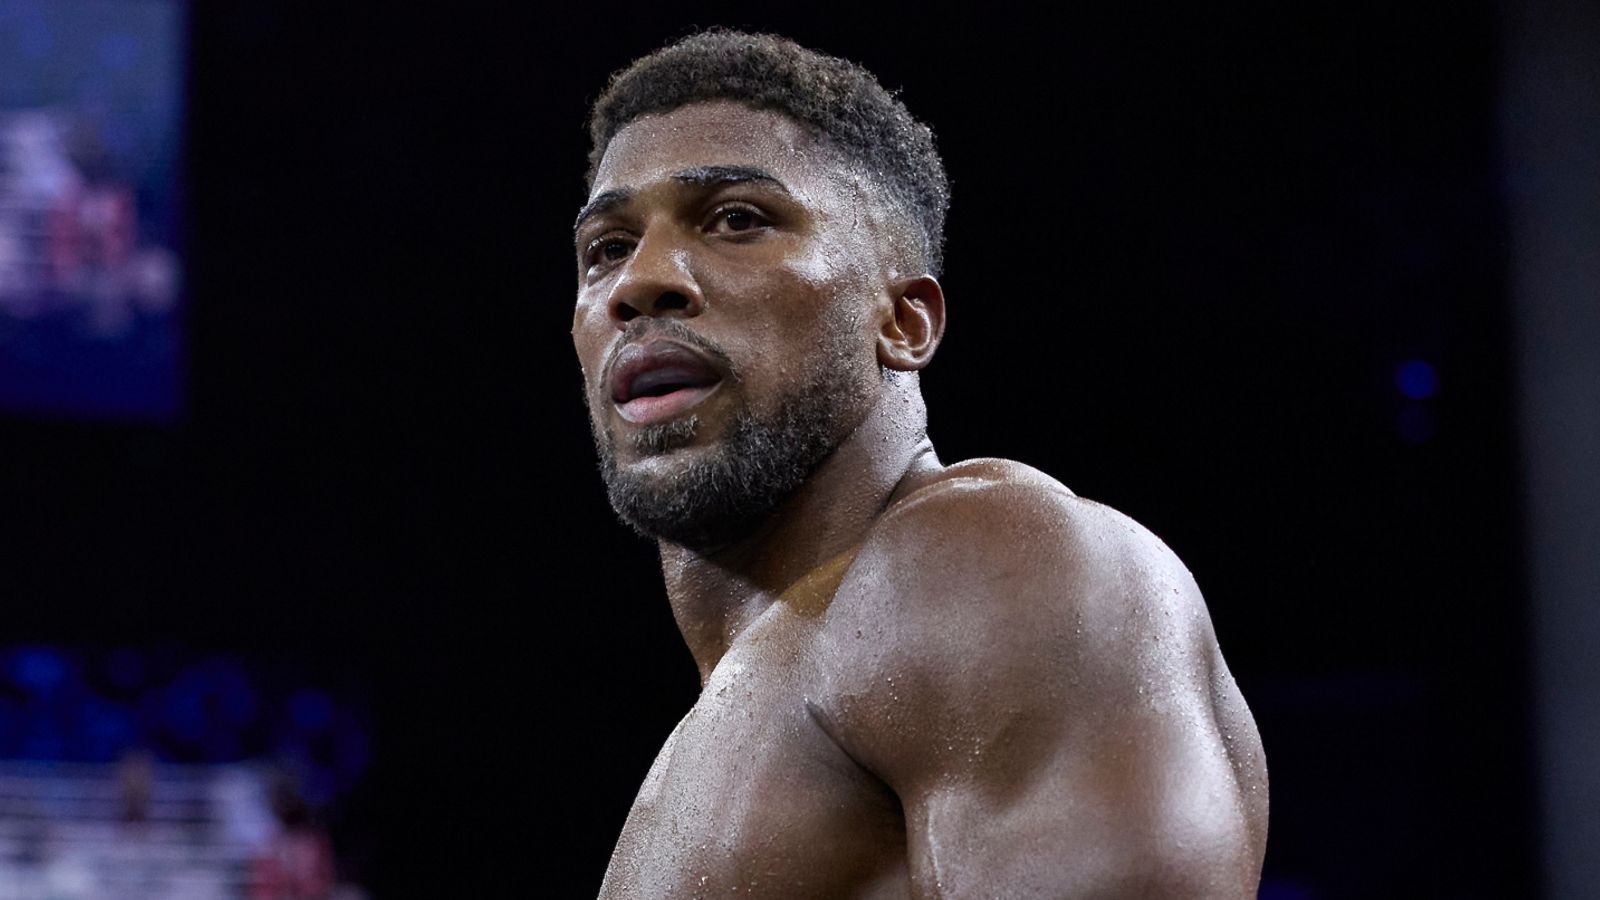 Anthony Joshua should retire if he loses to Jermaine Franklin on Saturday, says Johnny Nelson